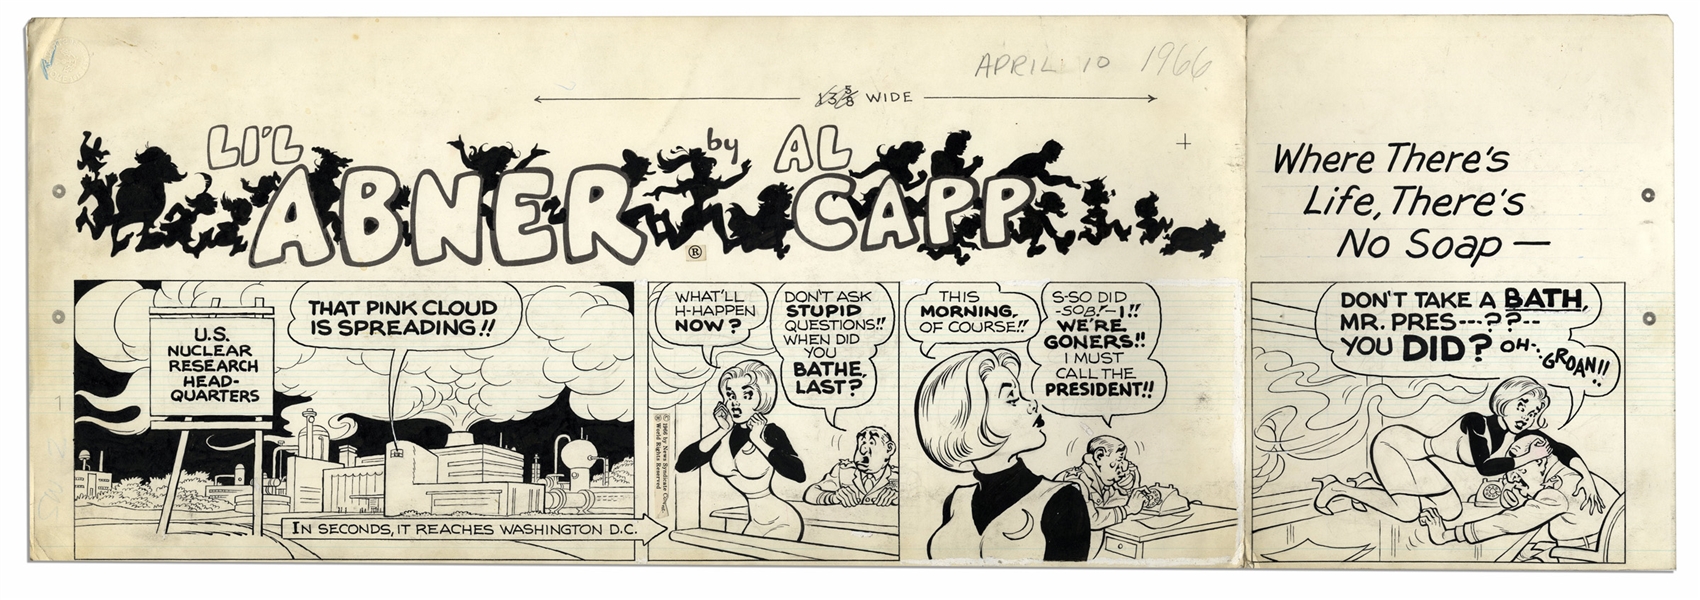 ''Li'l Abner'' Sunday Strip From 10 April 1966 Featuring Miss Scrubwell & S.W.I.N.E. -- Hand-Drawn by Al Capp -- 29.25'' x 23'' on 3 Separated Strips -- Very Good -- From the Al Capp Estate